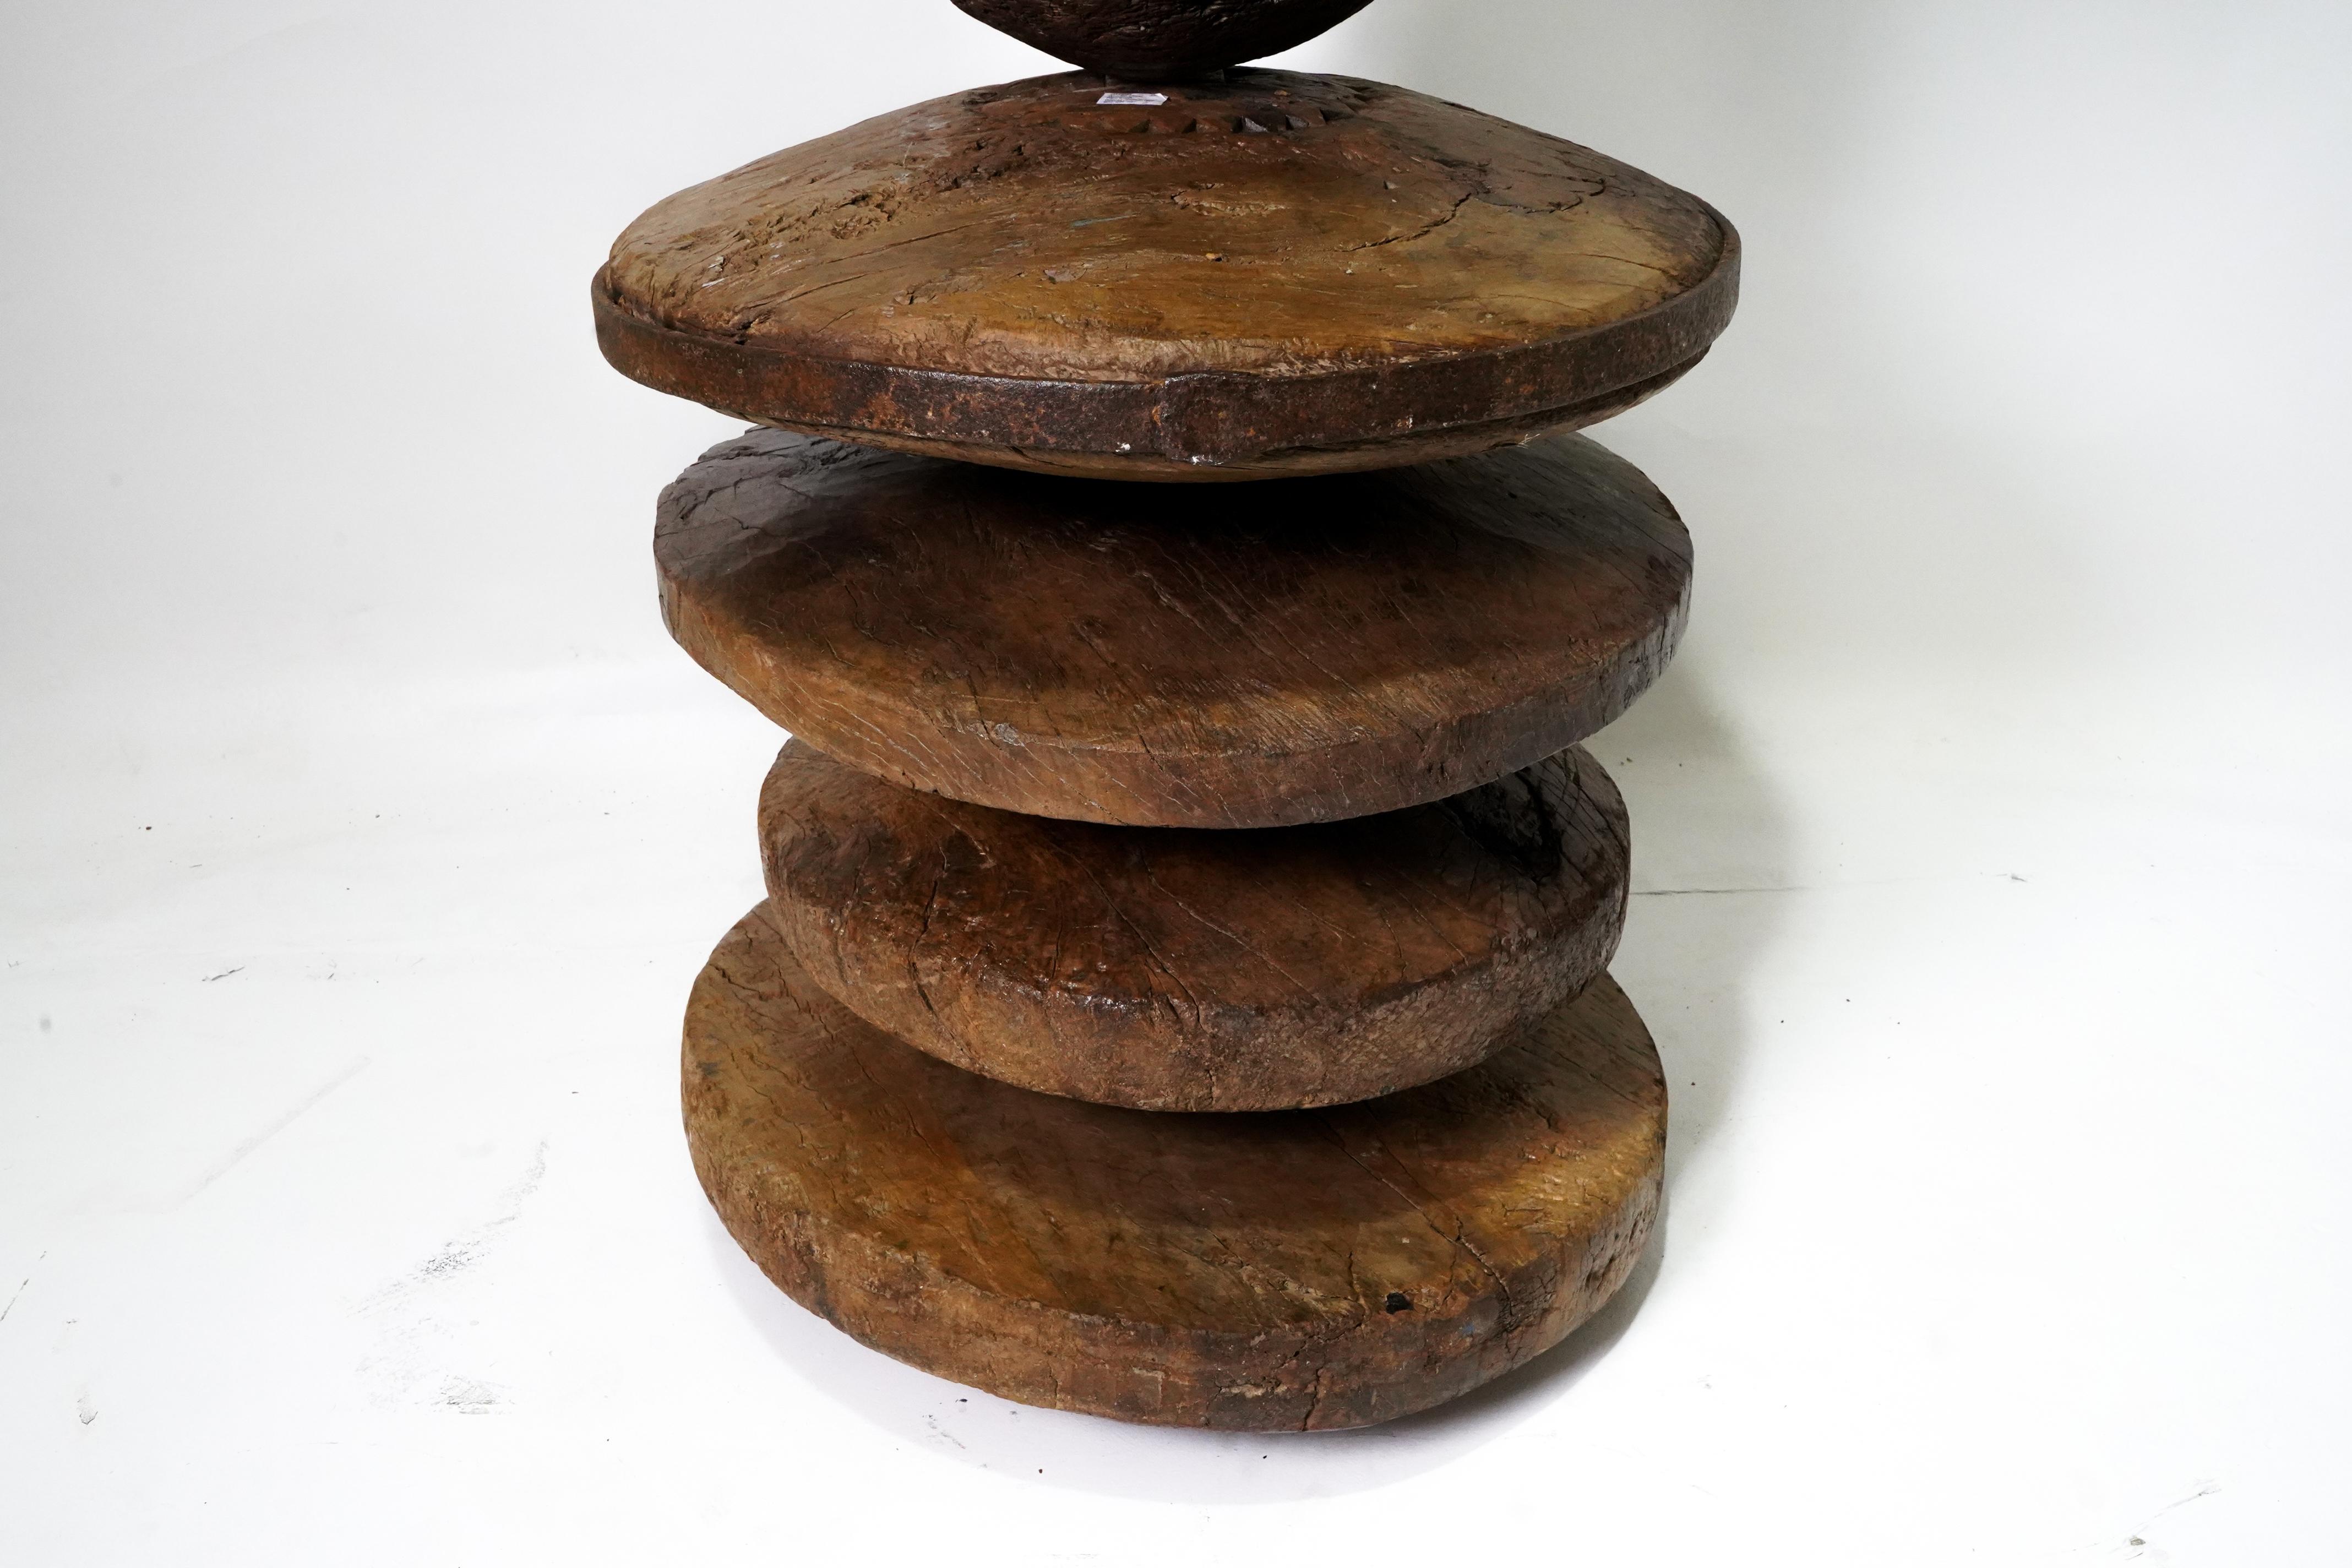 Hand-Carved Monumental Modern Sculpture Assembled From Ancient Wooden Wheels and Pulleys